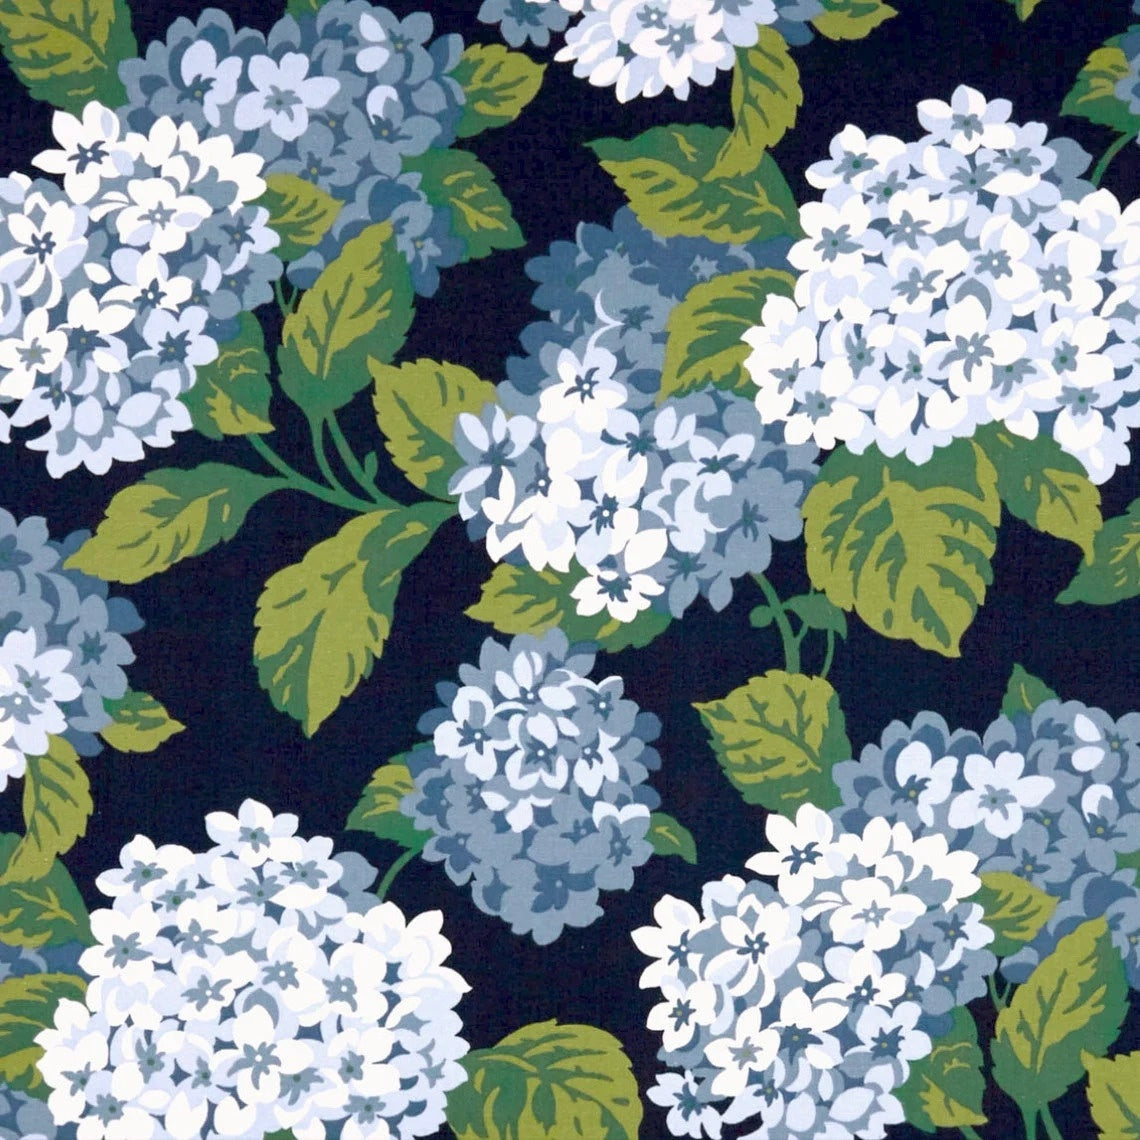 tailored valance in summerwind navy blue hydrangea floral, large scale